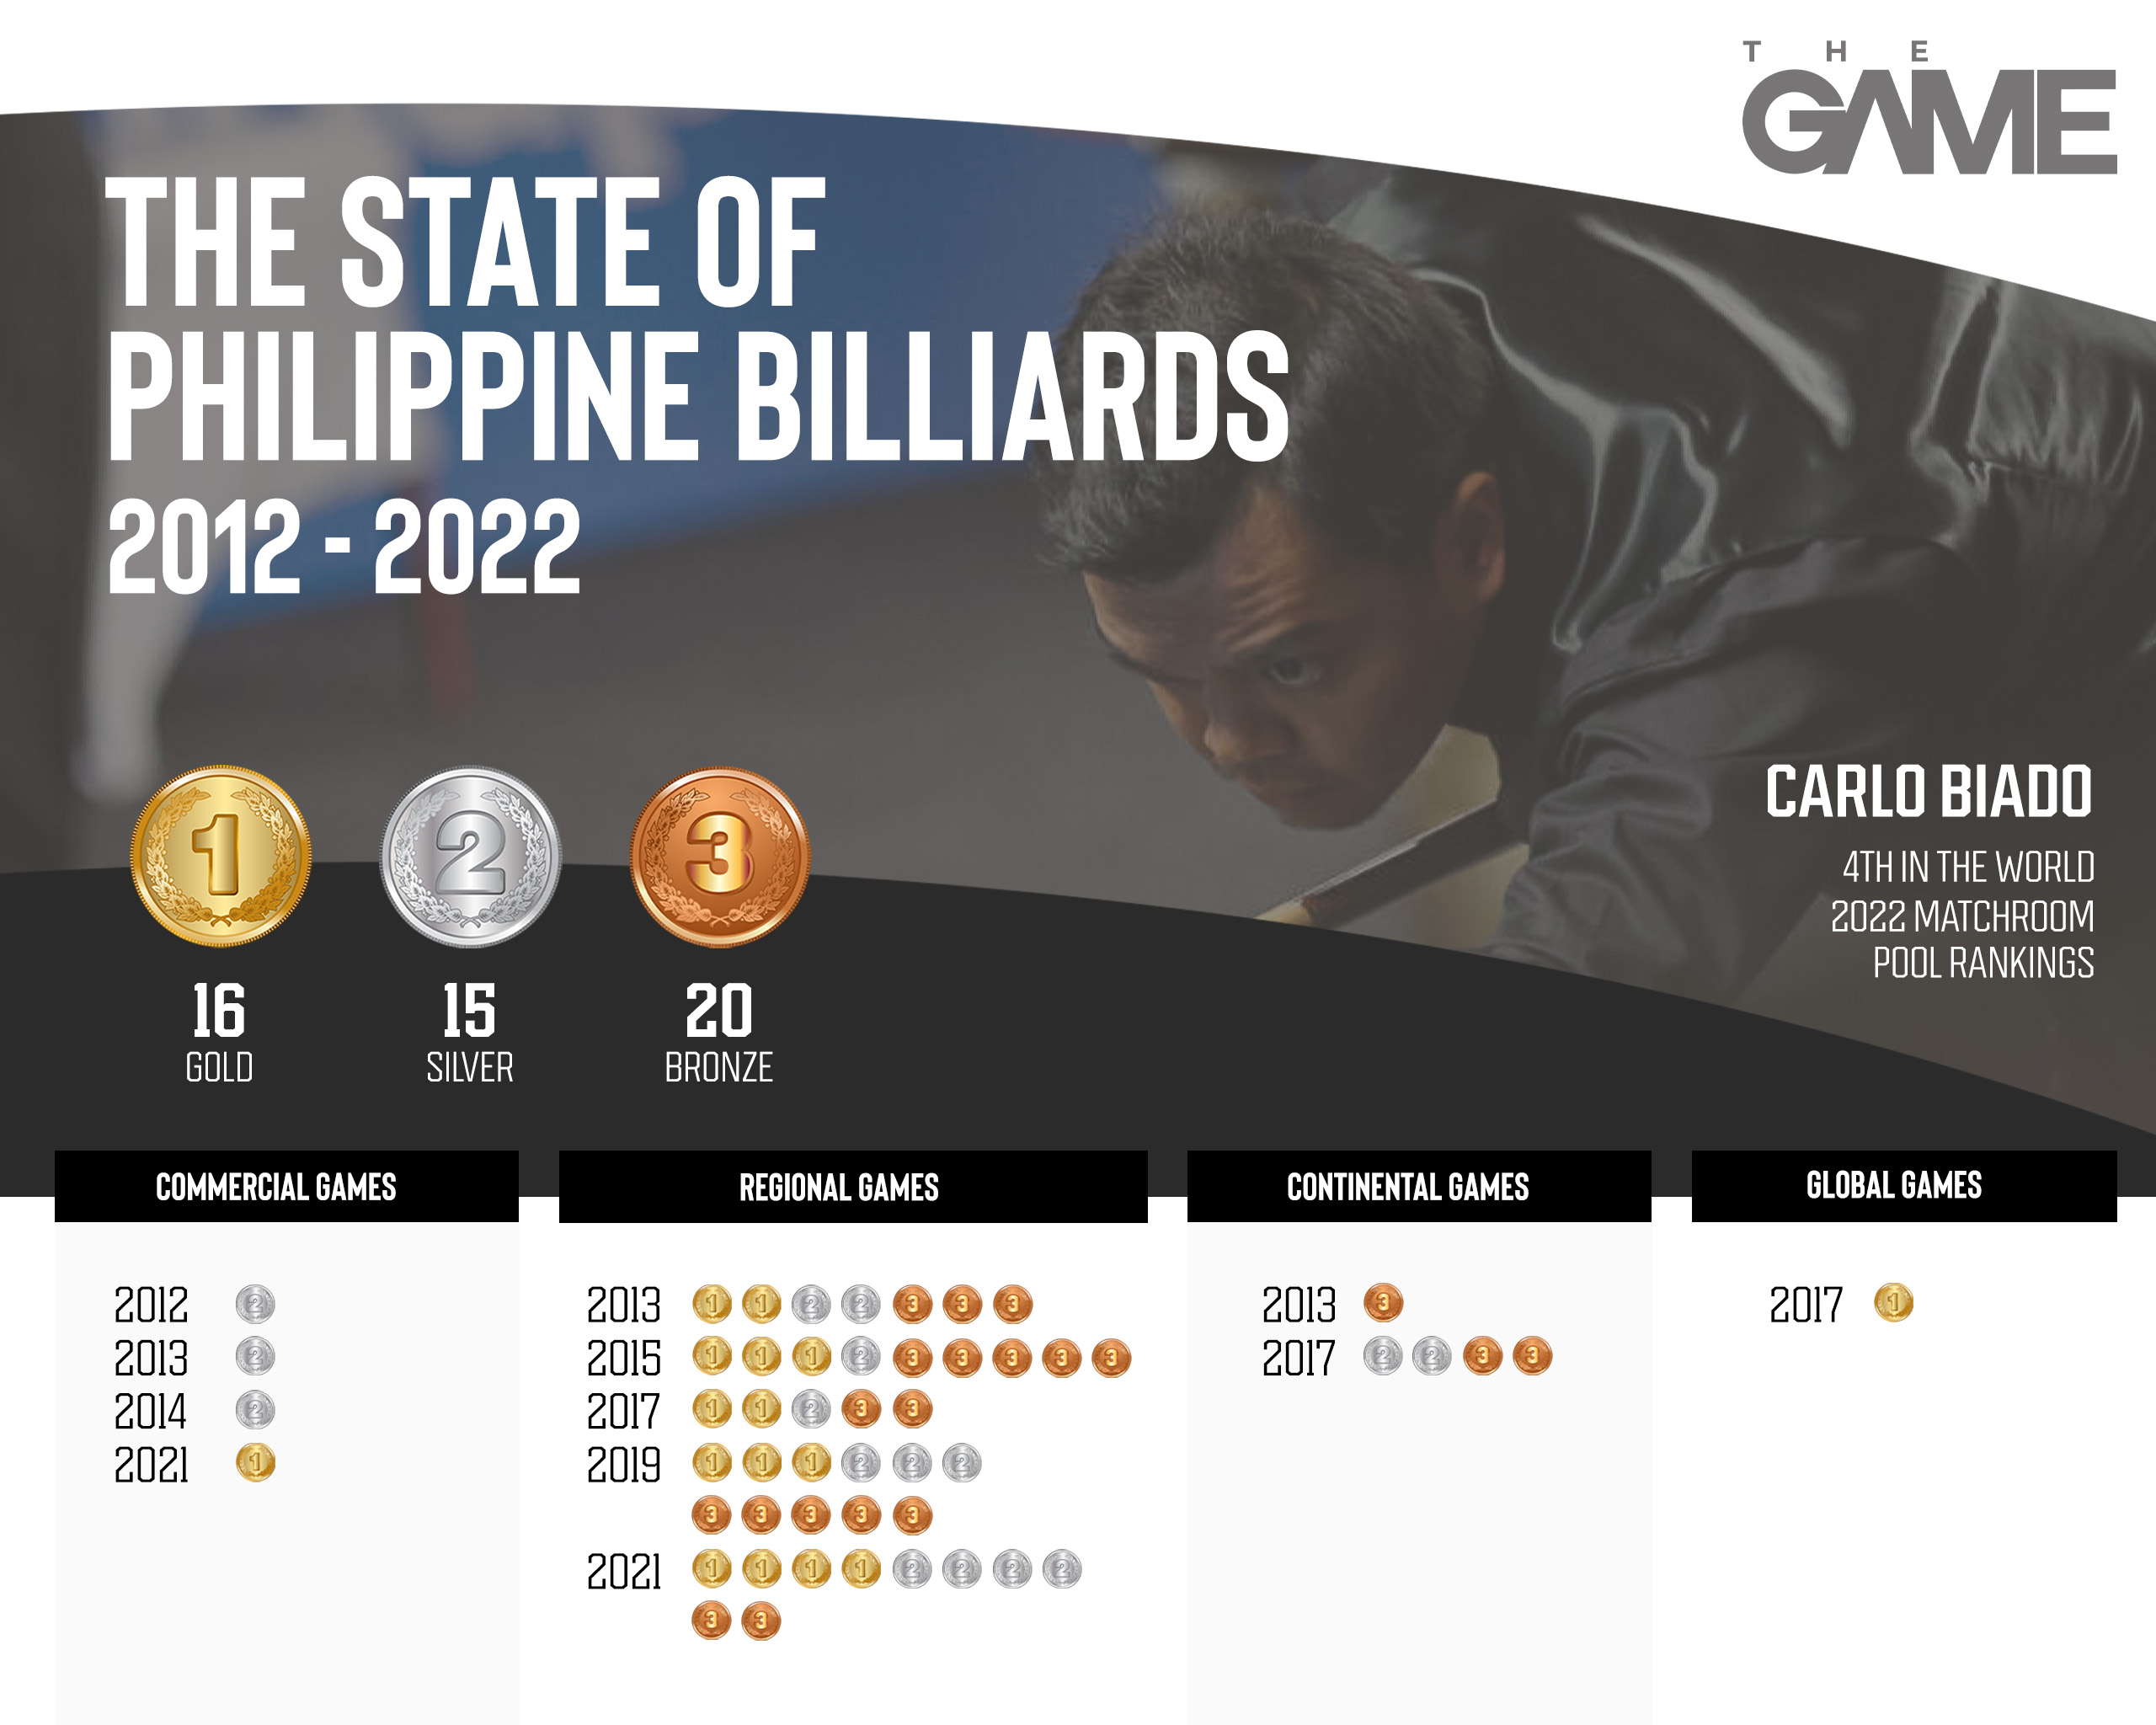 The Philippines' billiards medals and titles from 2012 to 2022.